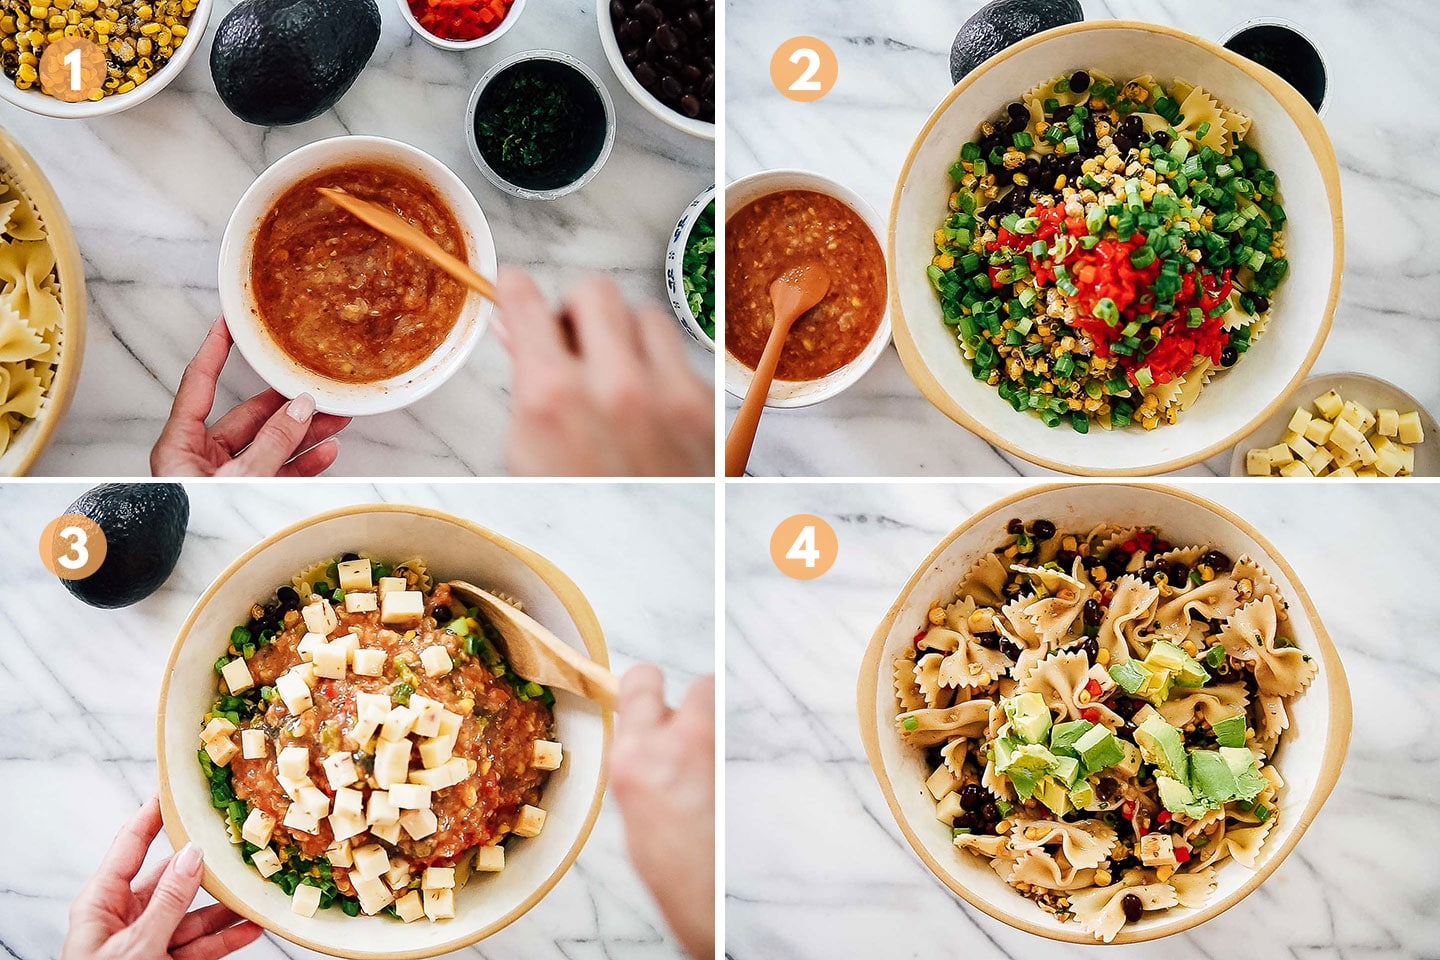 Step by step instructions for making southwest pasta salad.